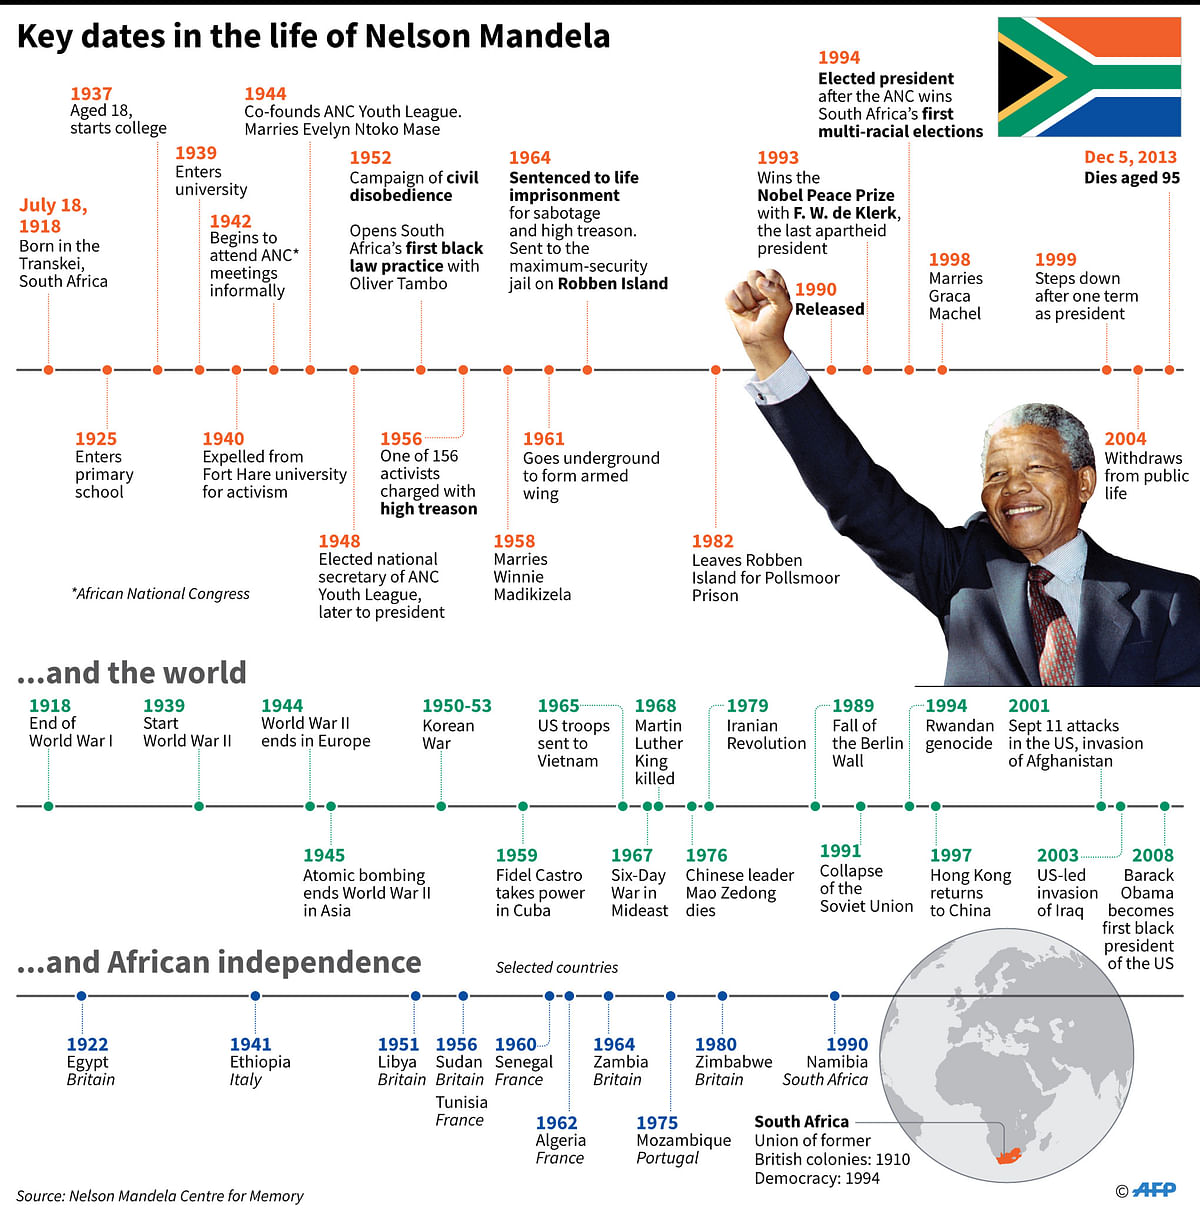 Key dates in the life of Nelson Mandela. AFP